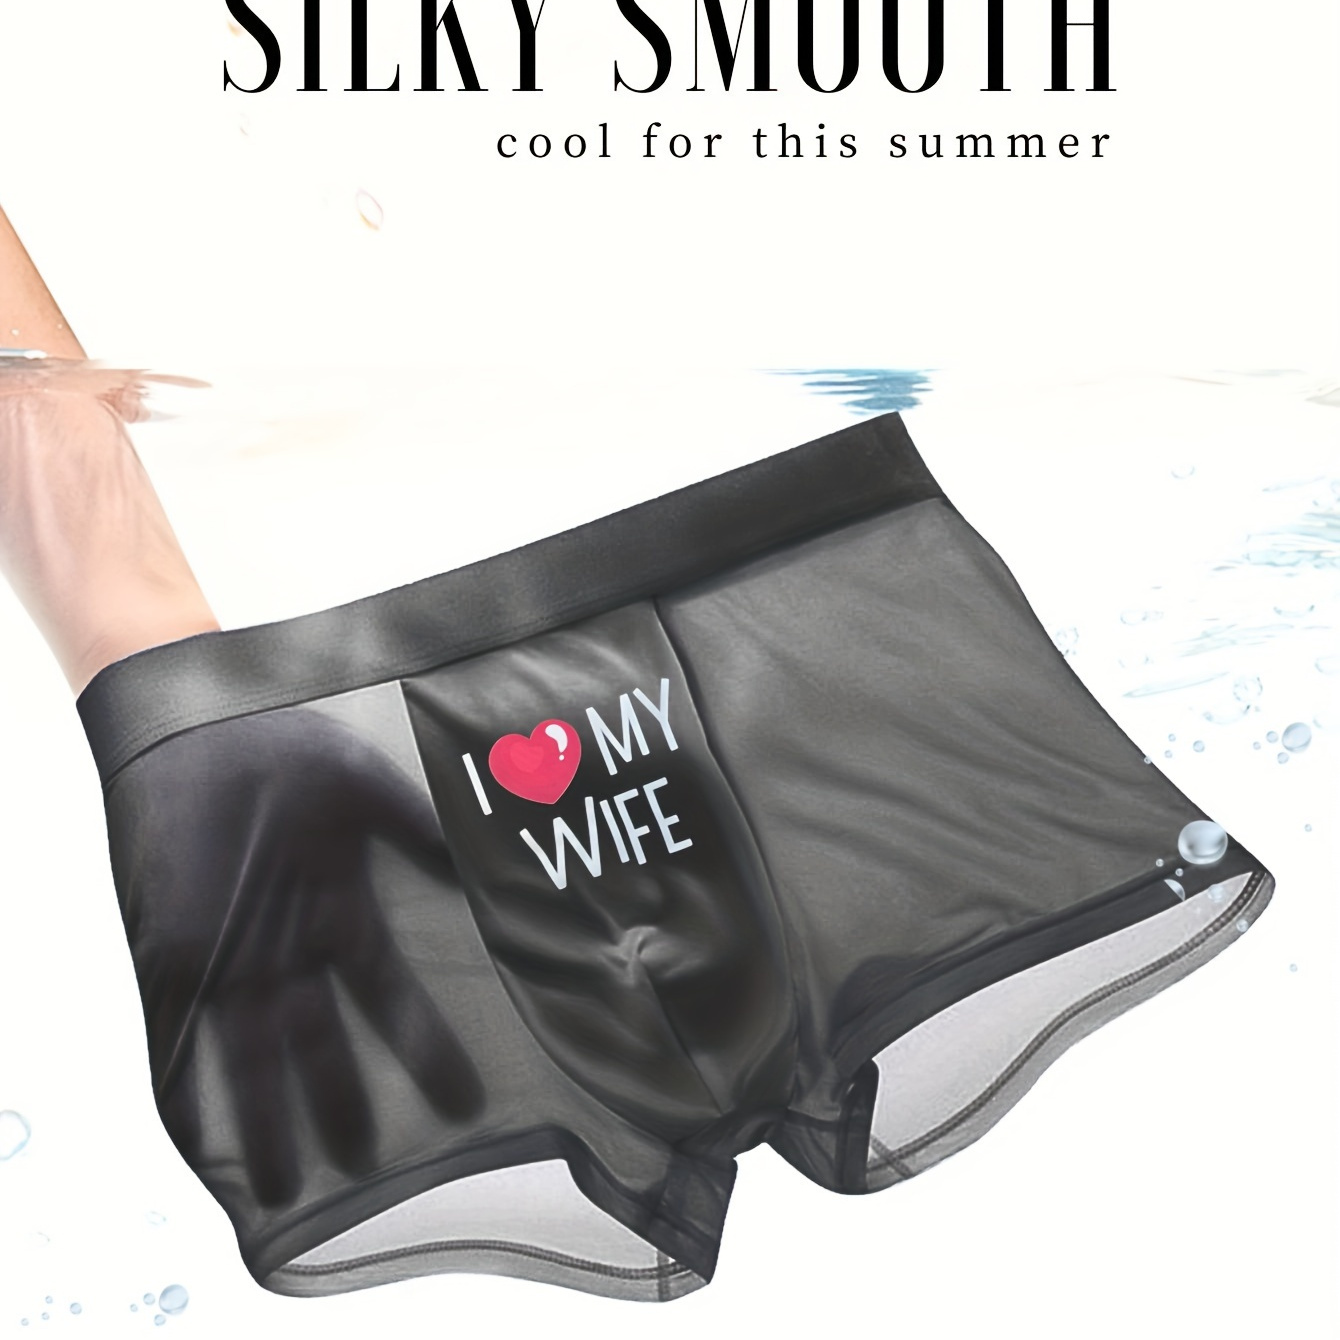 

I Love My Wife Print Men's Antibacterial Underwear, Casual Boxer Briefs Shorts, Breathable Comfy Stretchy Boxer Trunks, Sports Shorts For Spring Summer